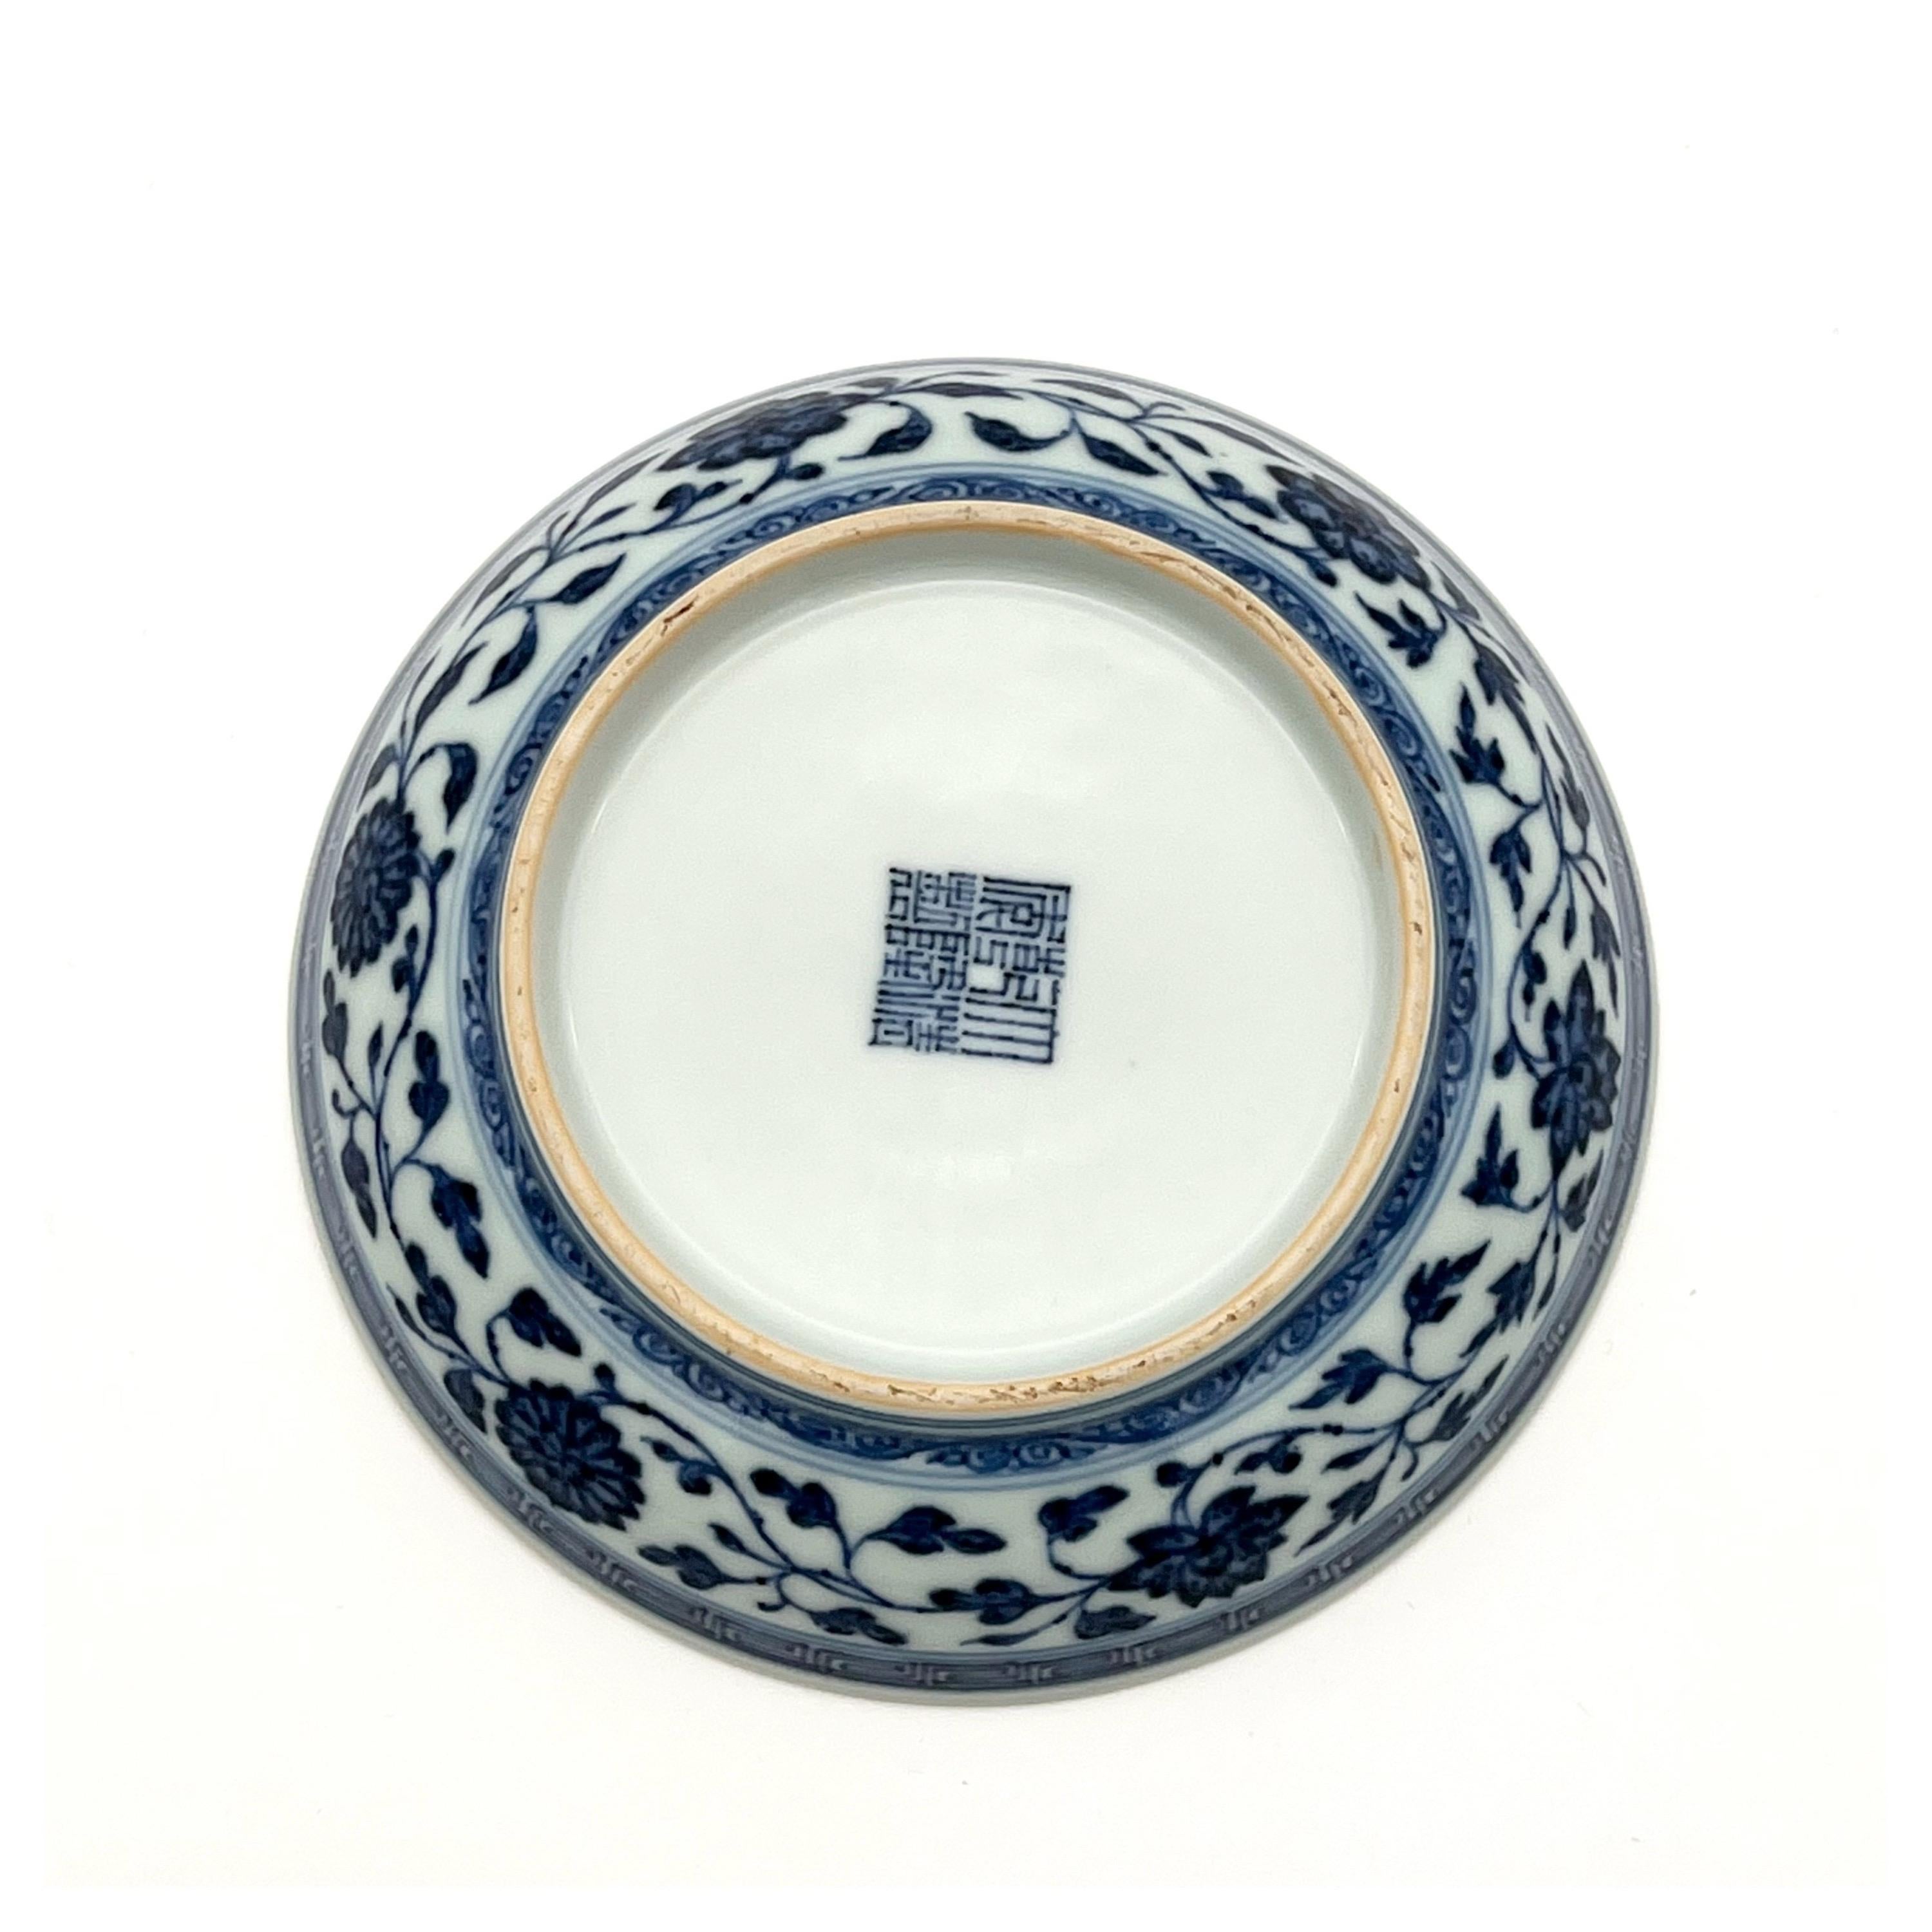 Qing Blue and White Ming-Style Dish, Qianlong Mark and Period, China 1736 - 1795